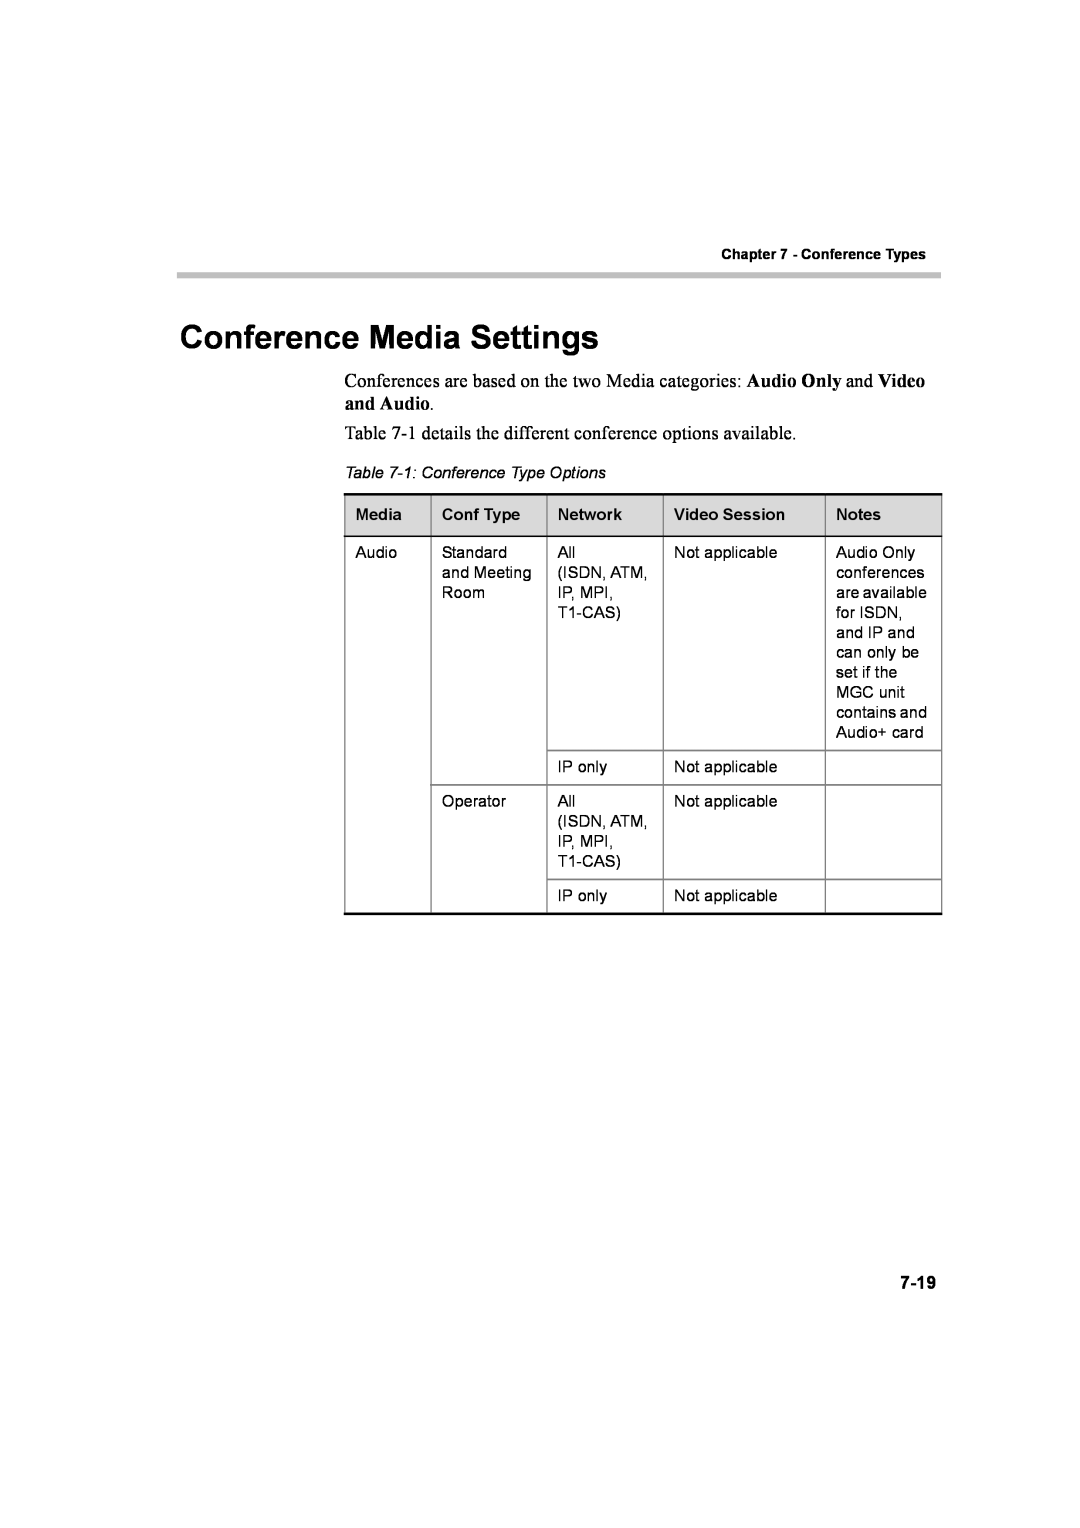 Polycom 8 manual Conference Media Settings, Conf Type, Network, Video Session, Notes 